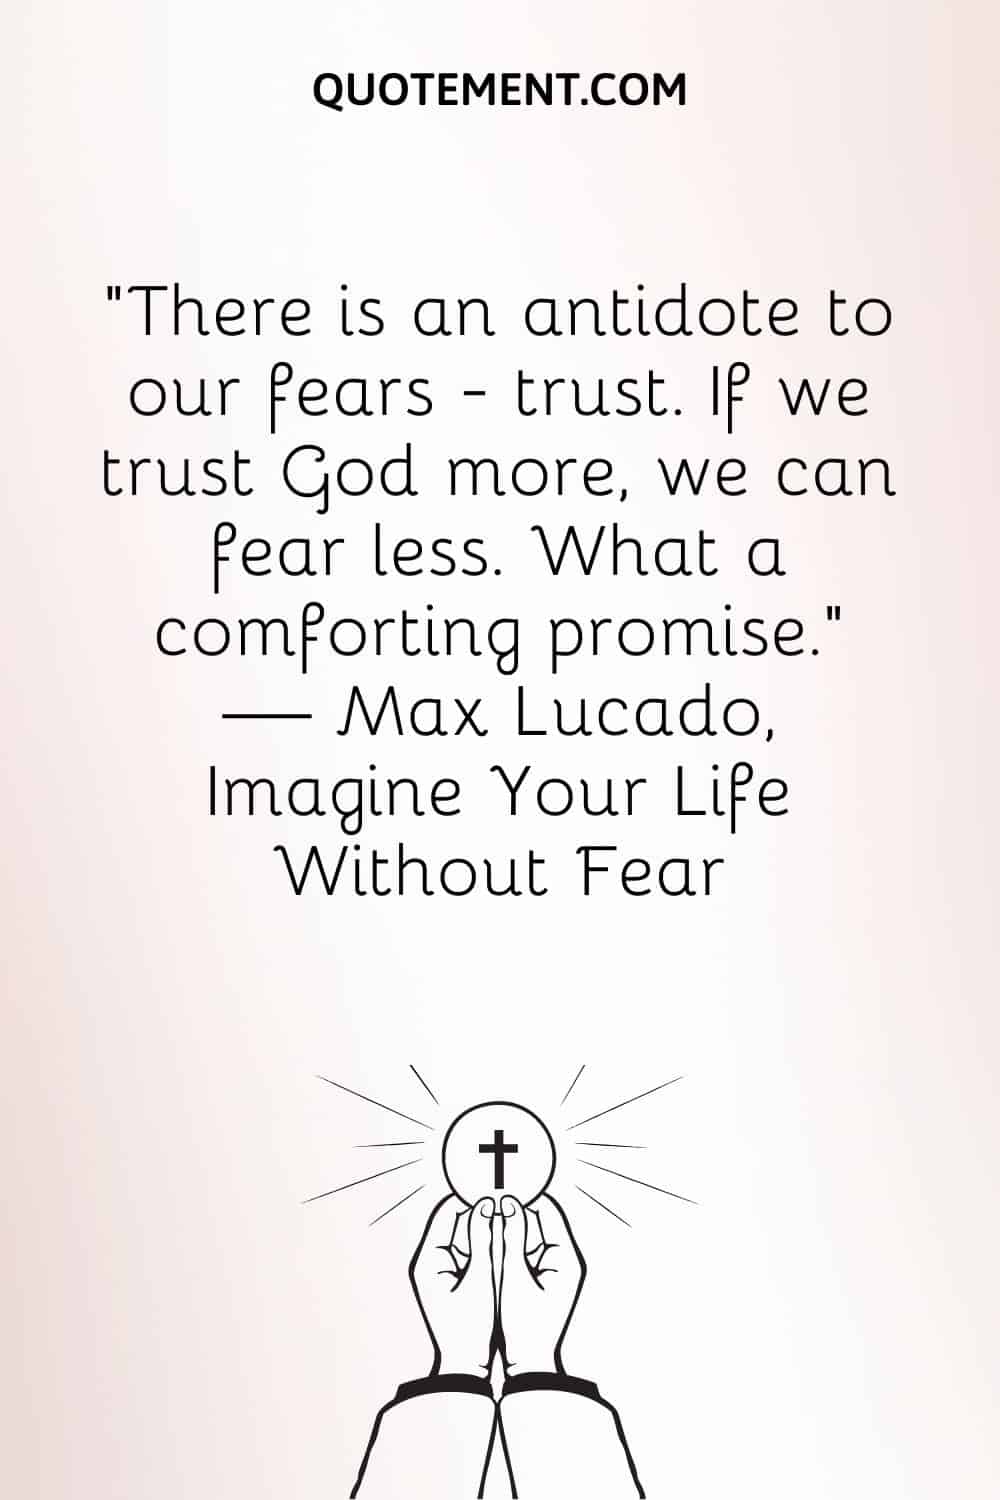 There is an antidote to our fears - trust. If we trust God more, we can fear less. What a comforting promise